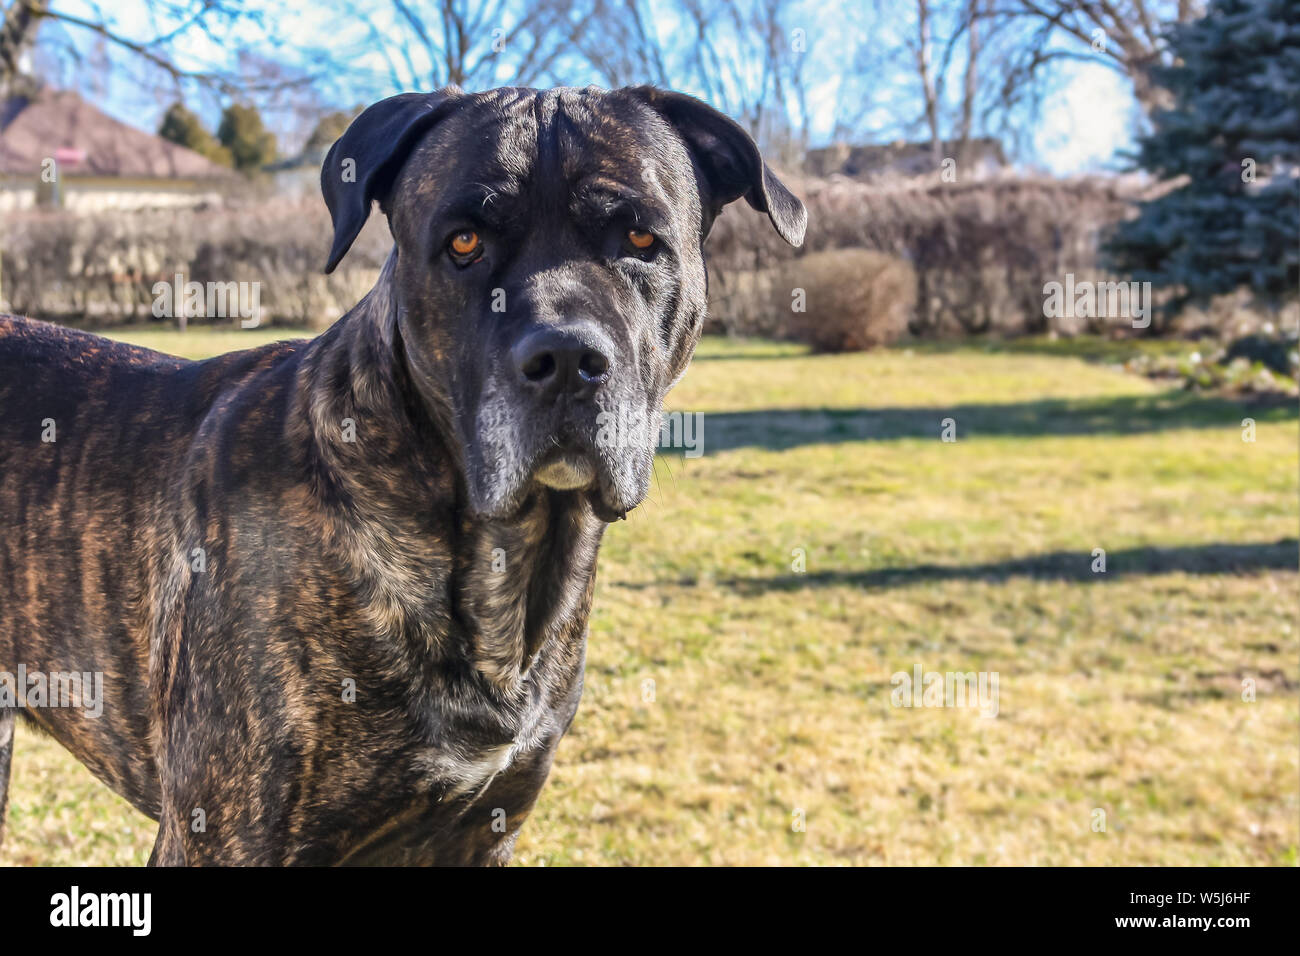 A New Cane Corso Dog Stands And Looks At The Home Yard In A